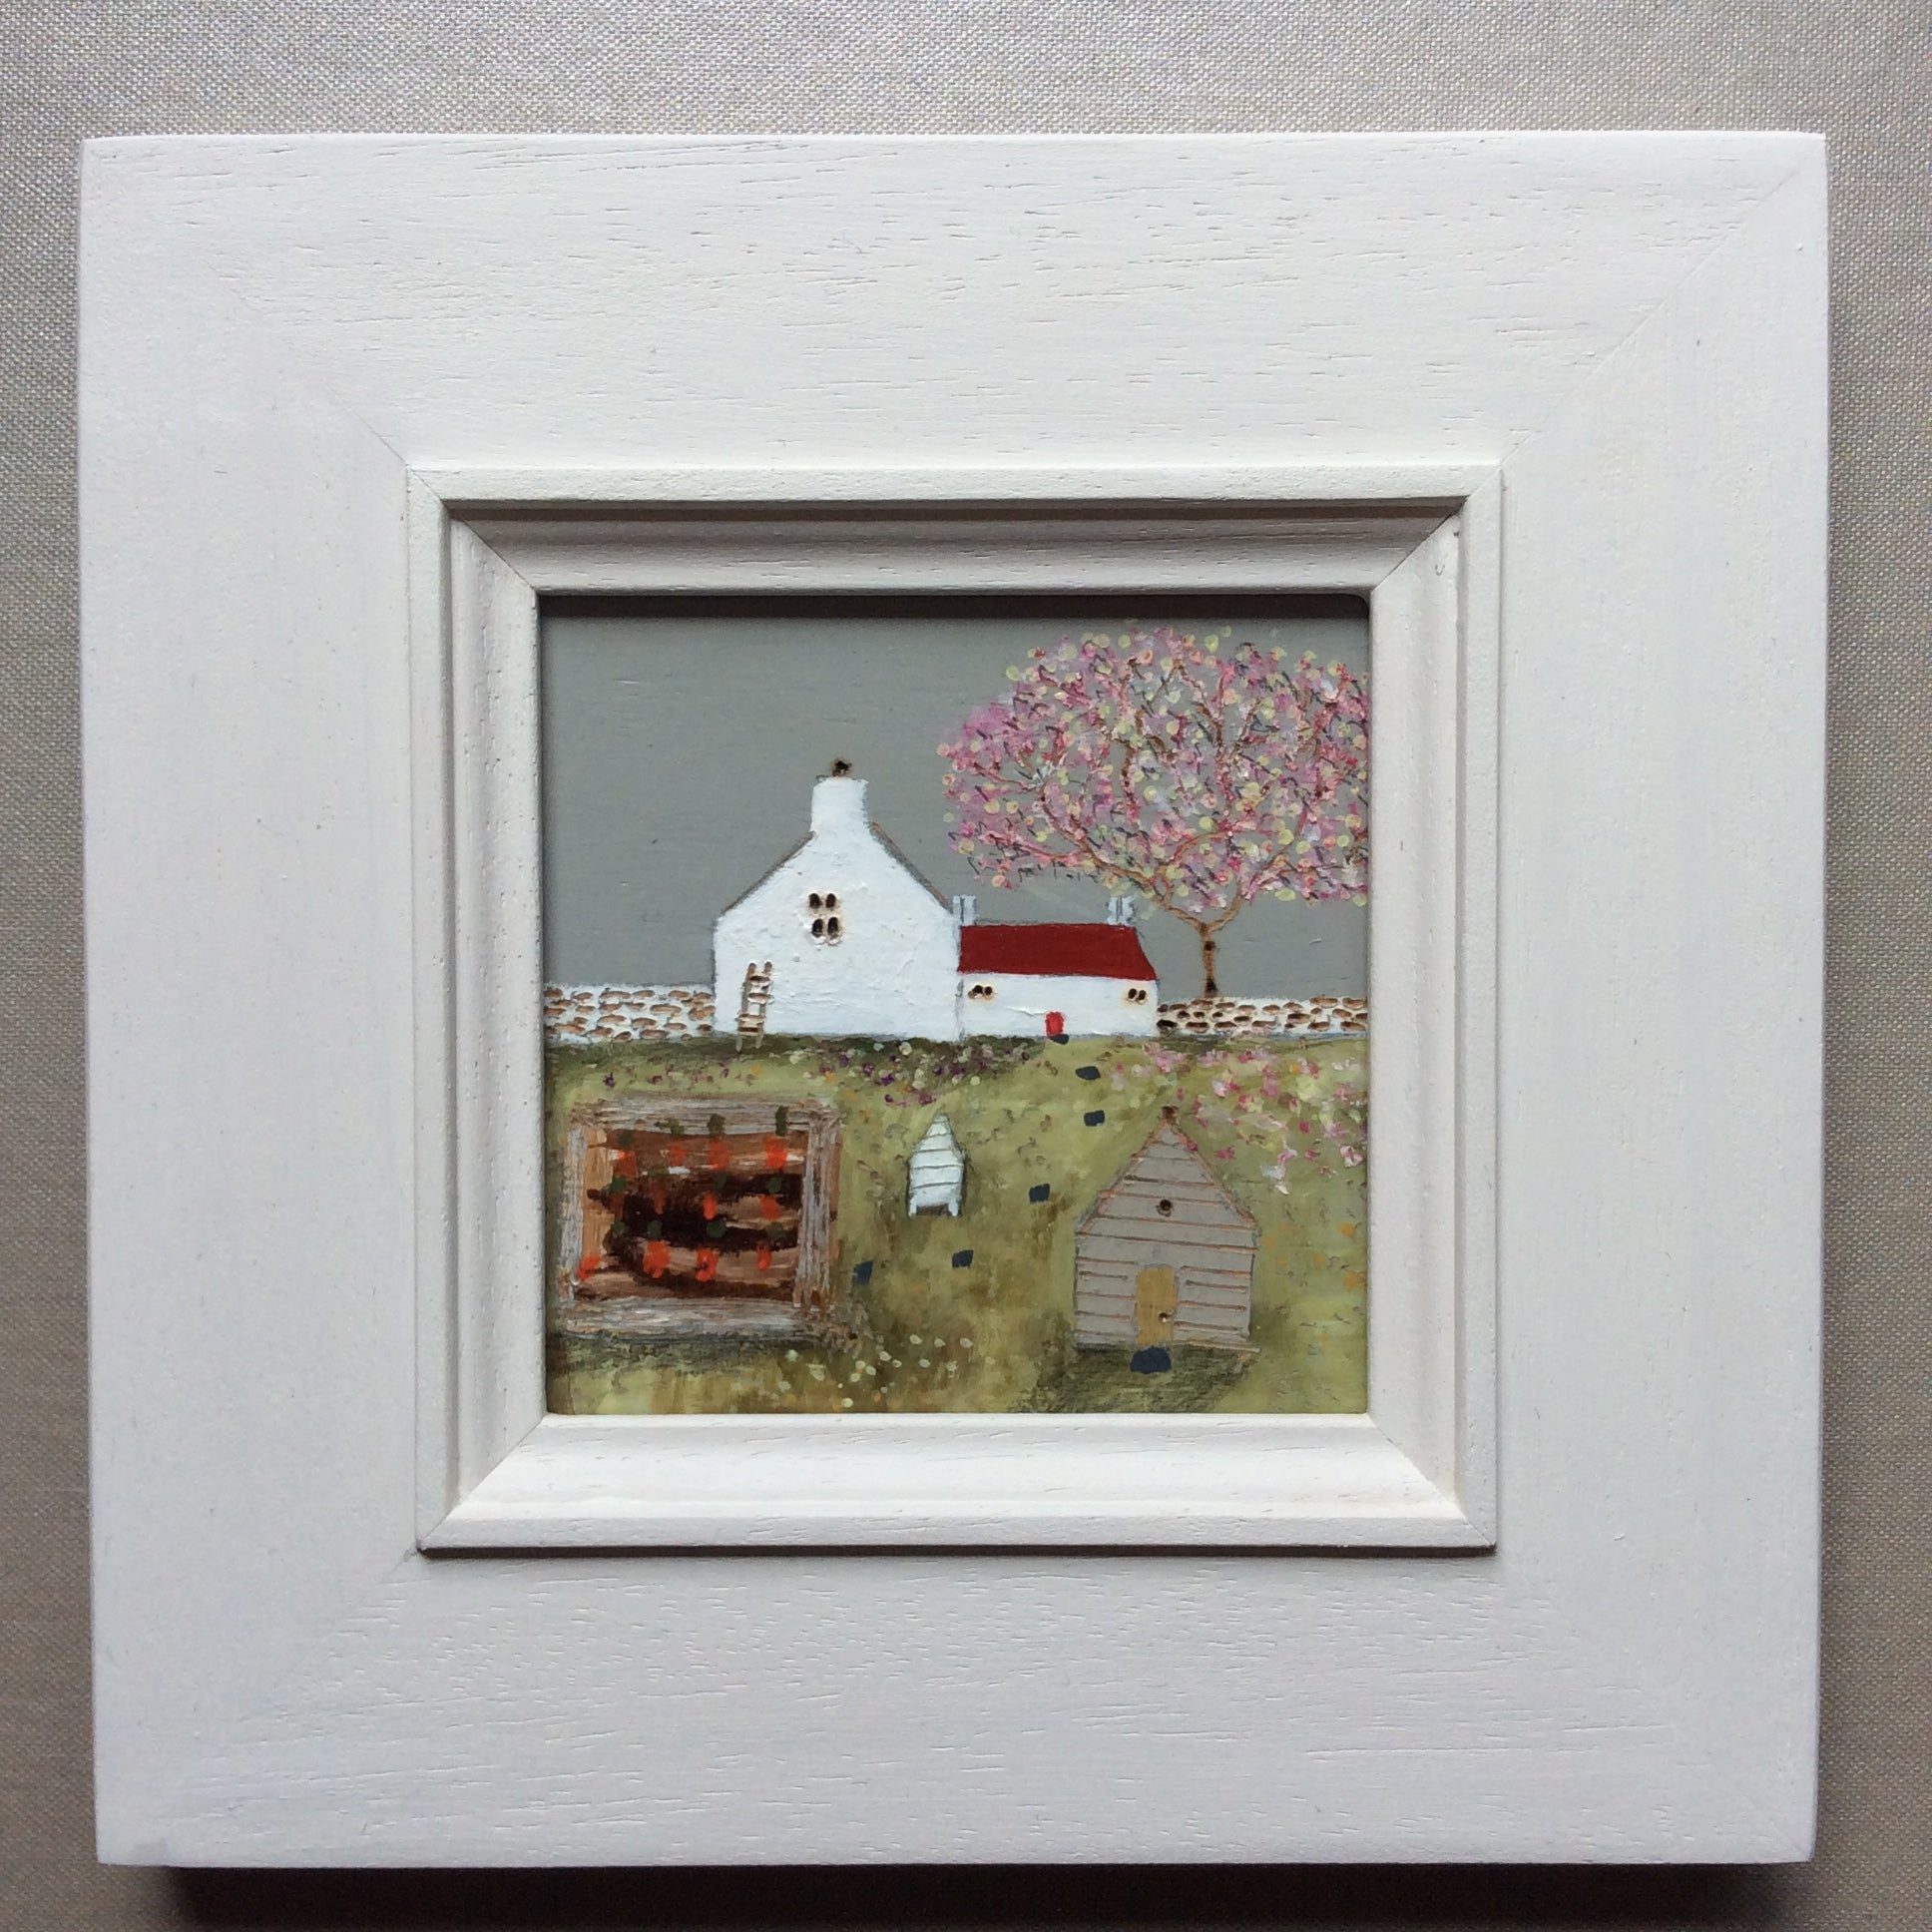 Mixed Media Art on wood By Louise O'Hara - "Carrots, Bees and a little grey shed”